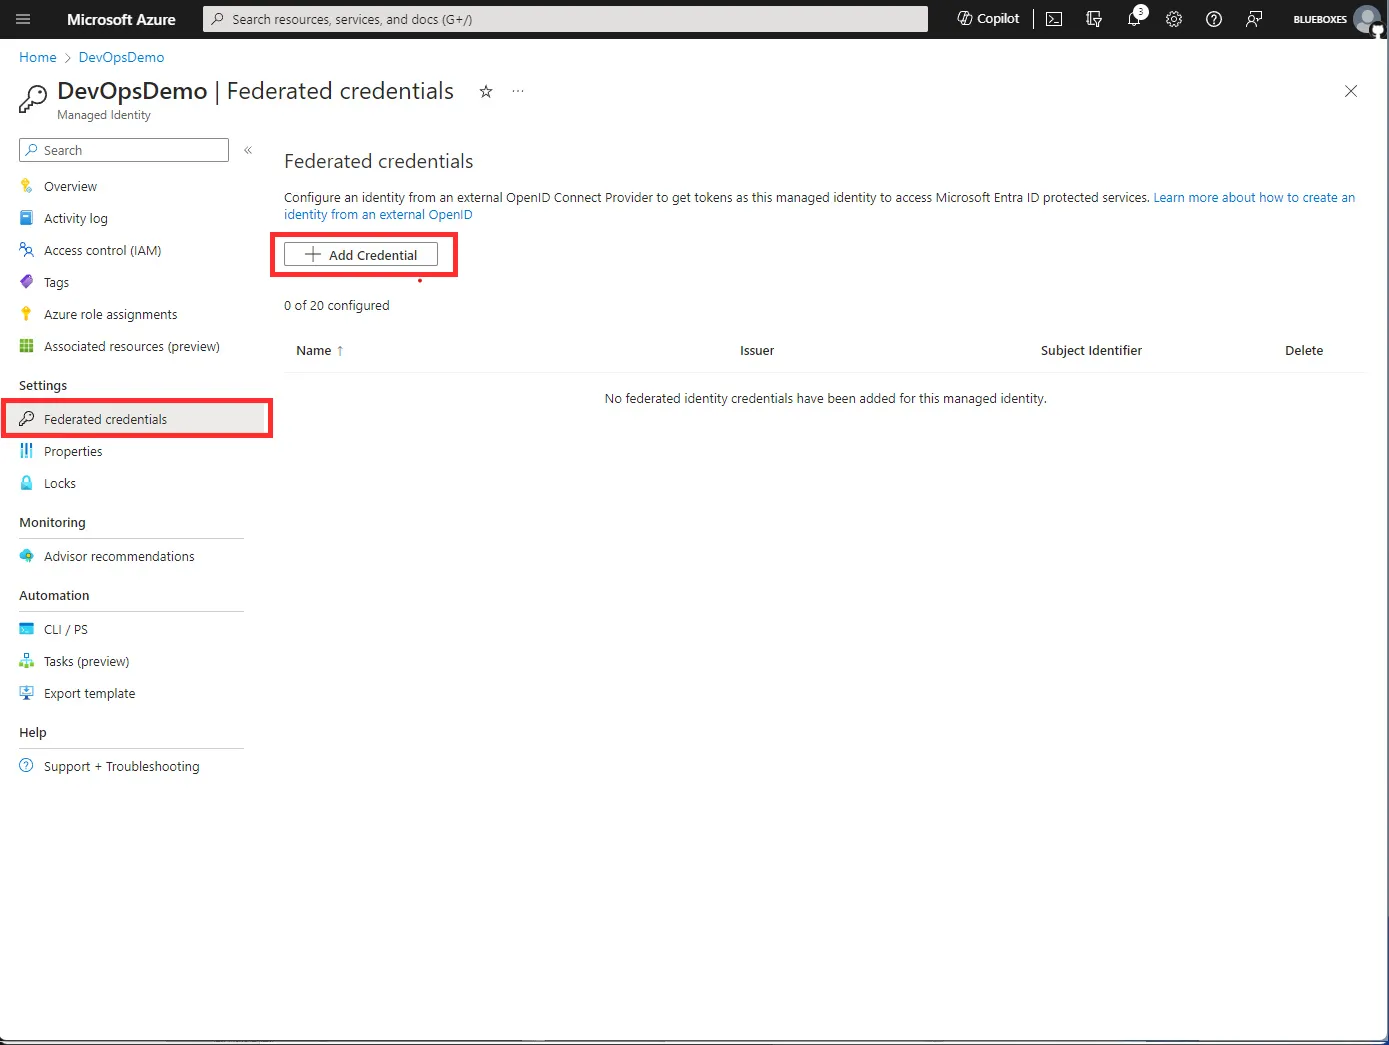 Screenshot of Azure highlighting how to find Federated Credentials on the managed identity